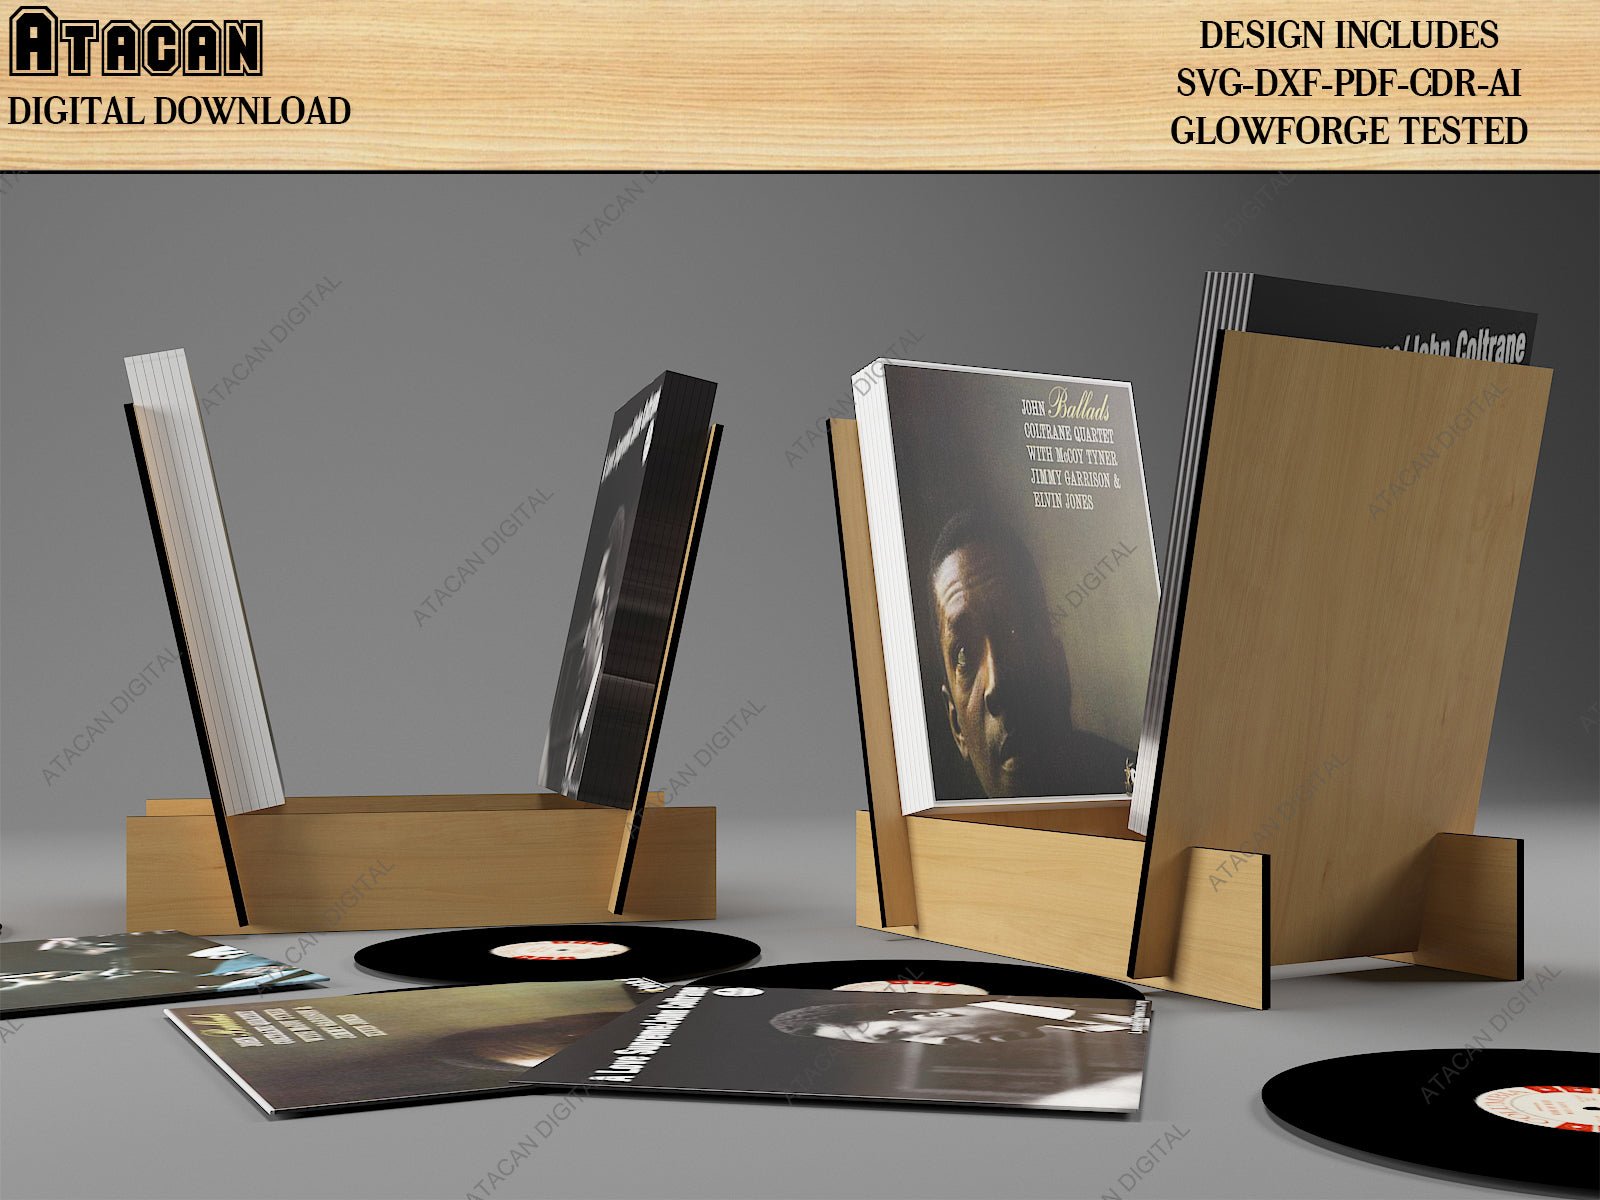 Office Stackable Paper Trays / Stacking Box set / Vinyl Record Display Holder SVG DXF CDR Ai 499